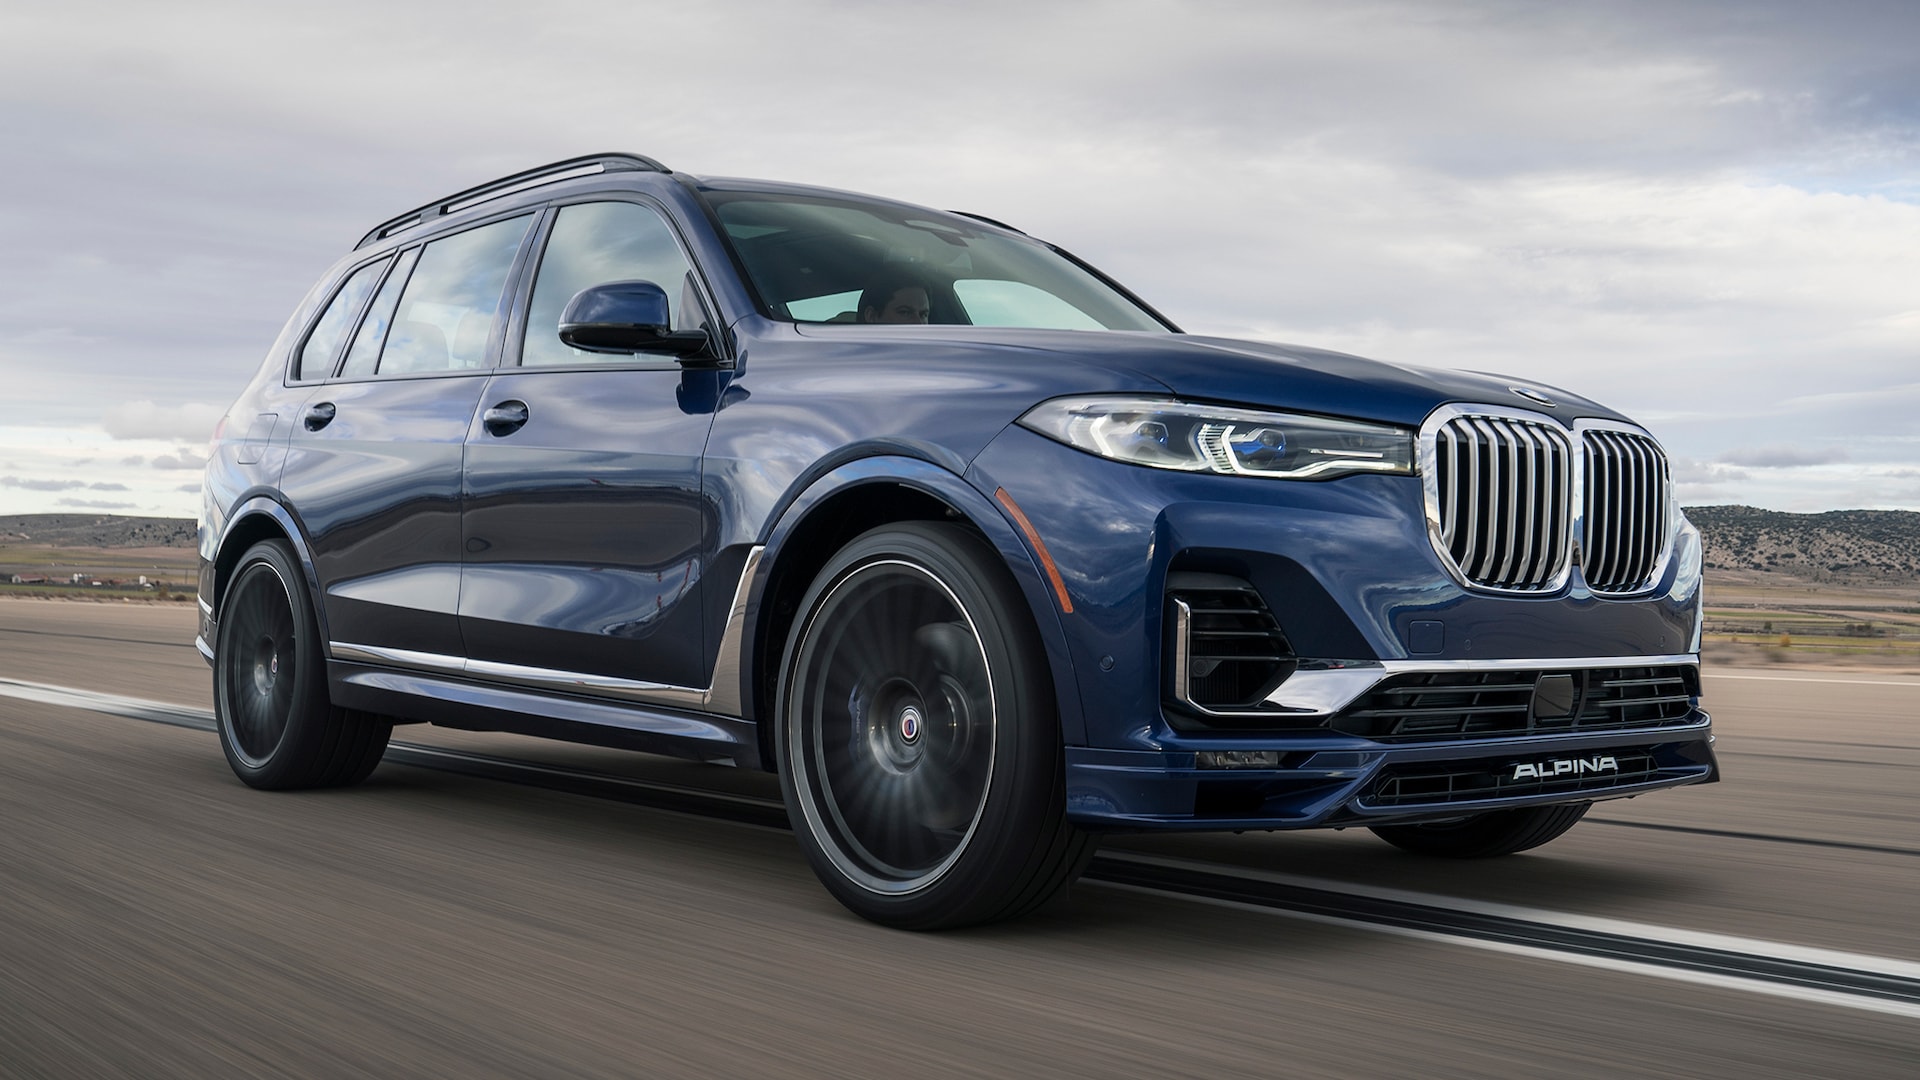 2021 BMW X7 Prices, Reviews, and Photos - MotorTrend